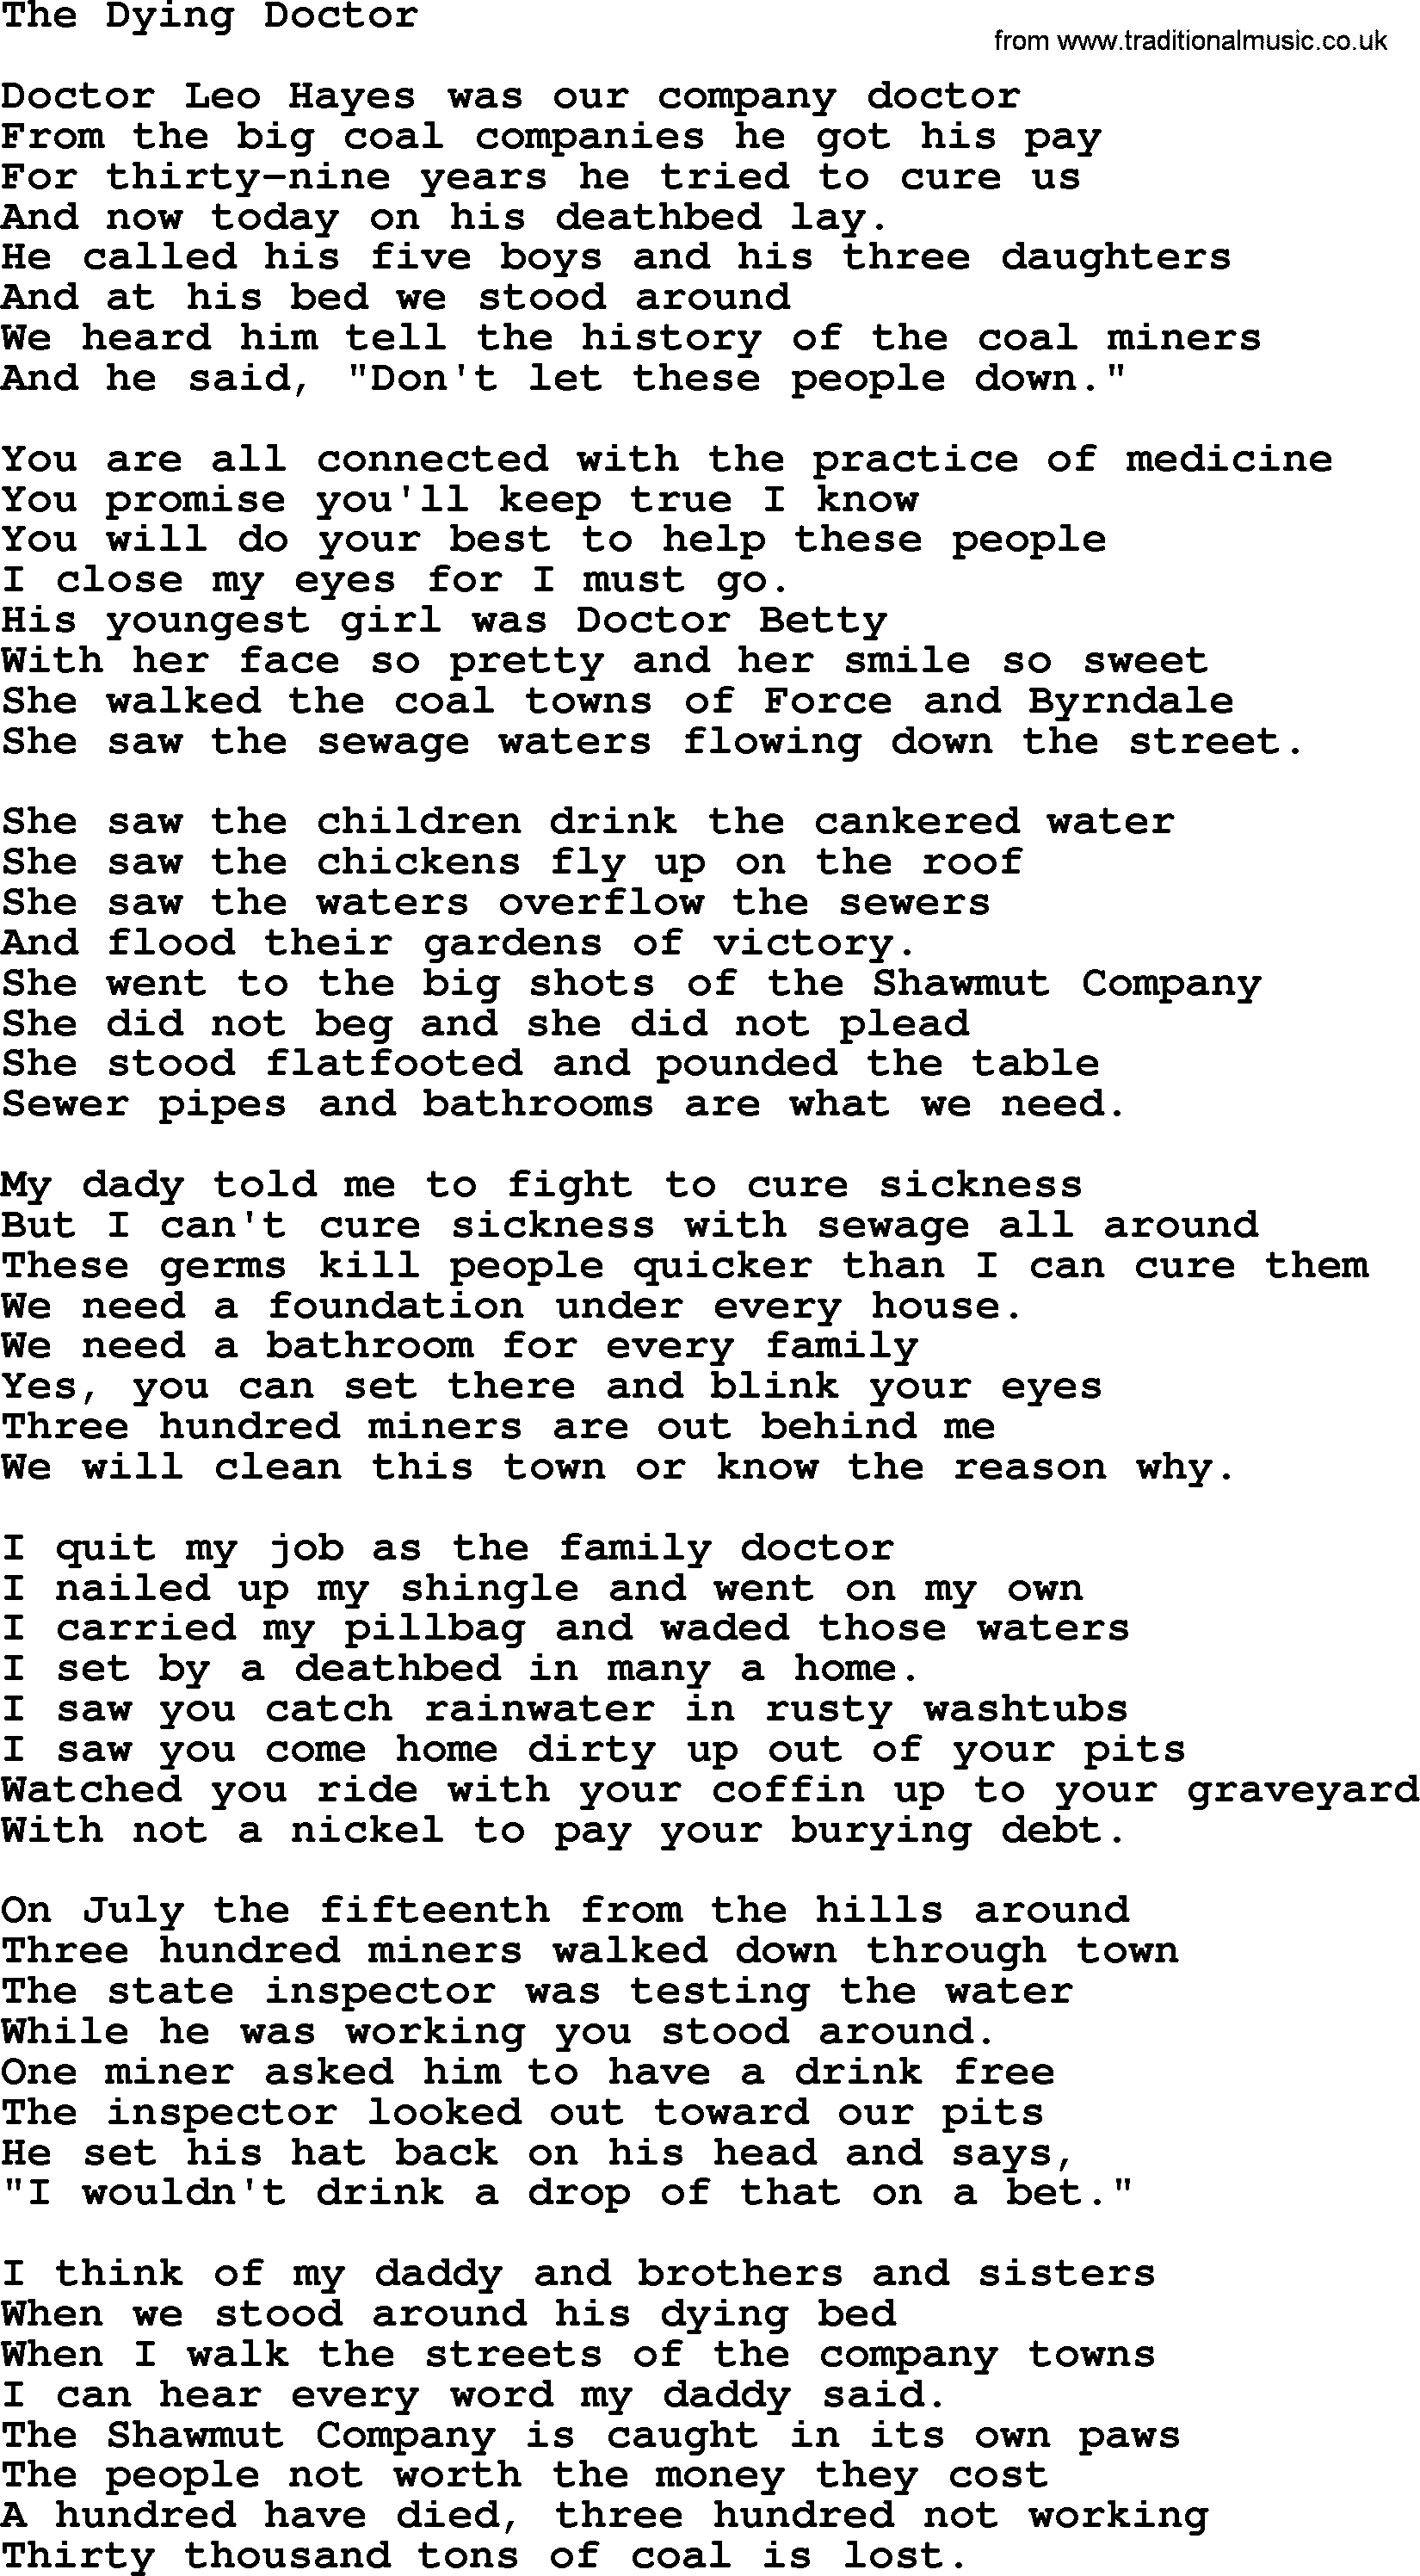 Woody Guthrie song The Dying Doctor lyrics